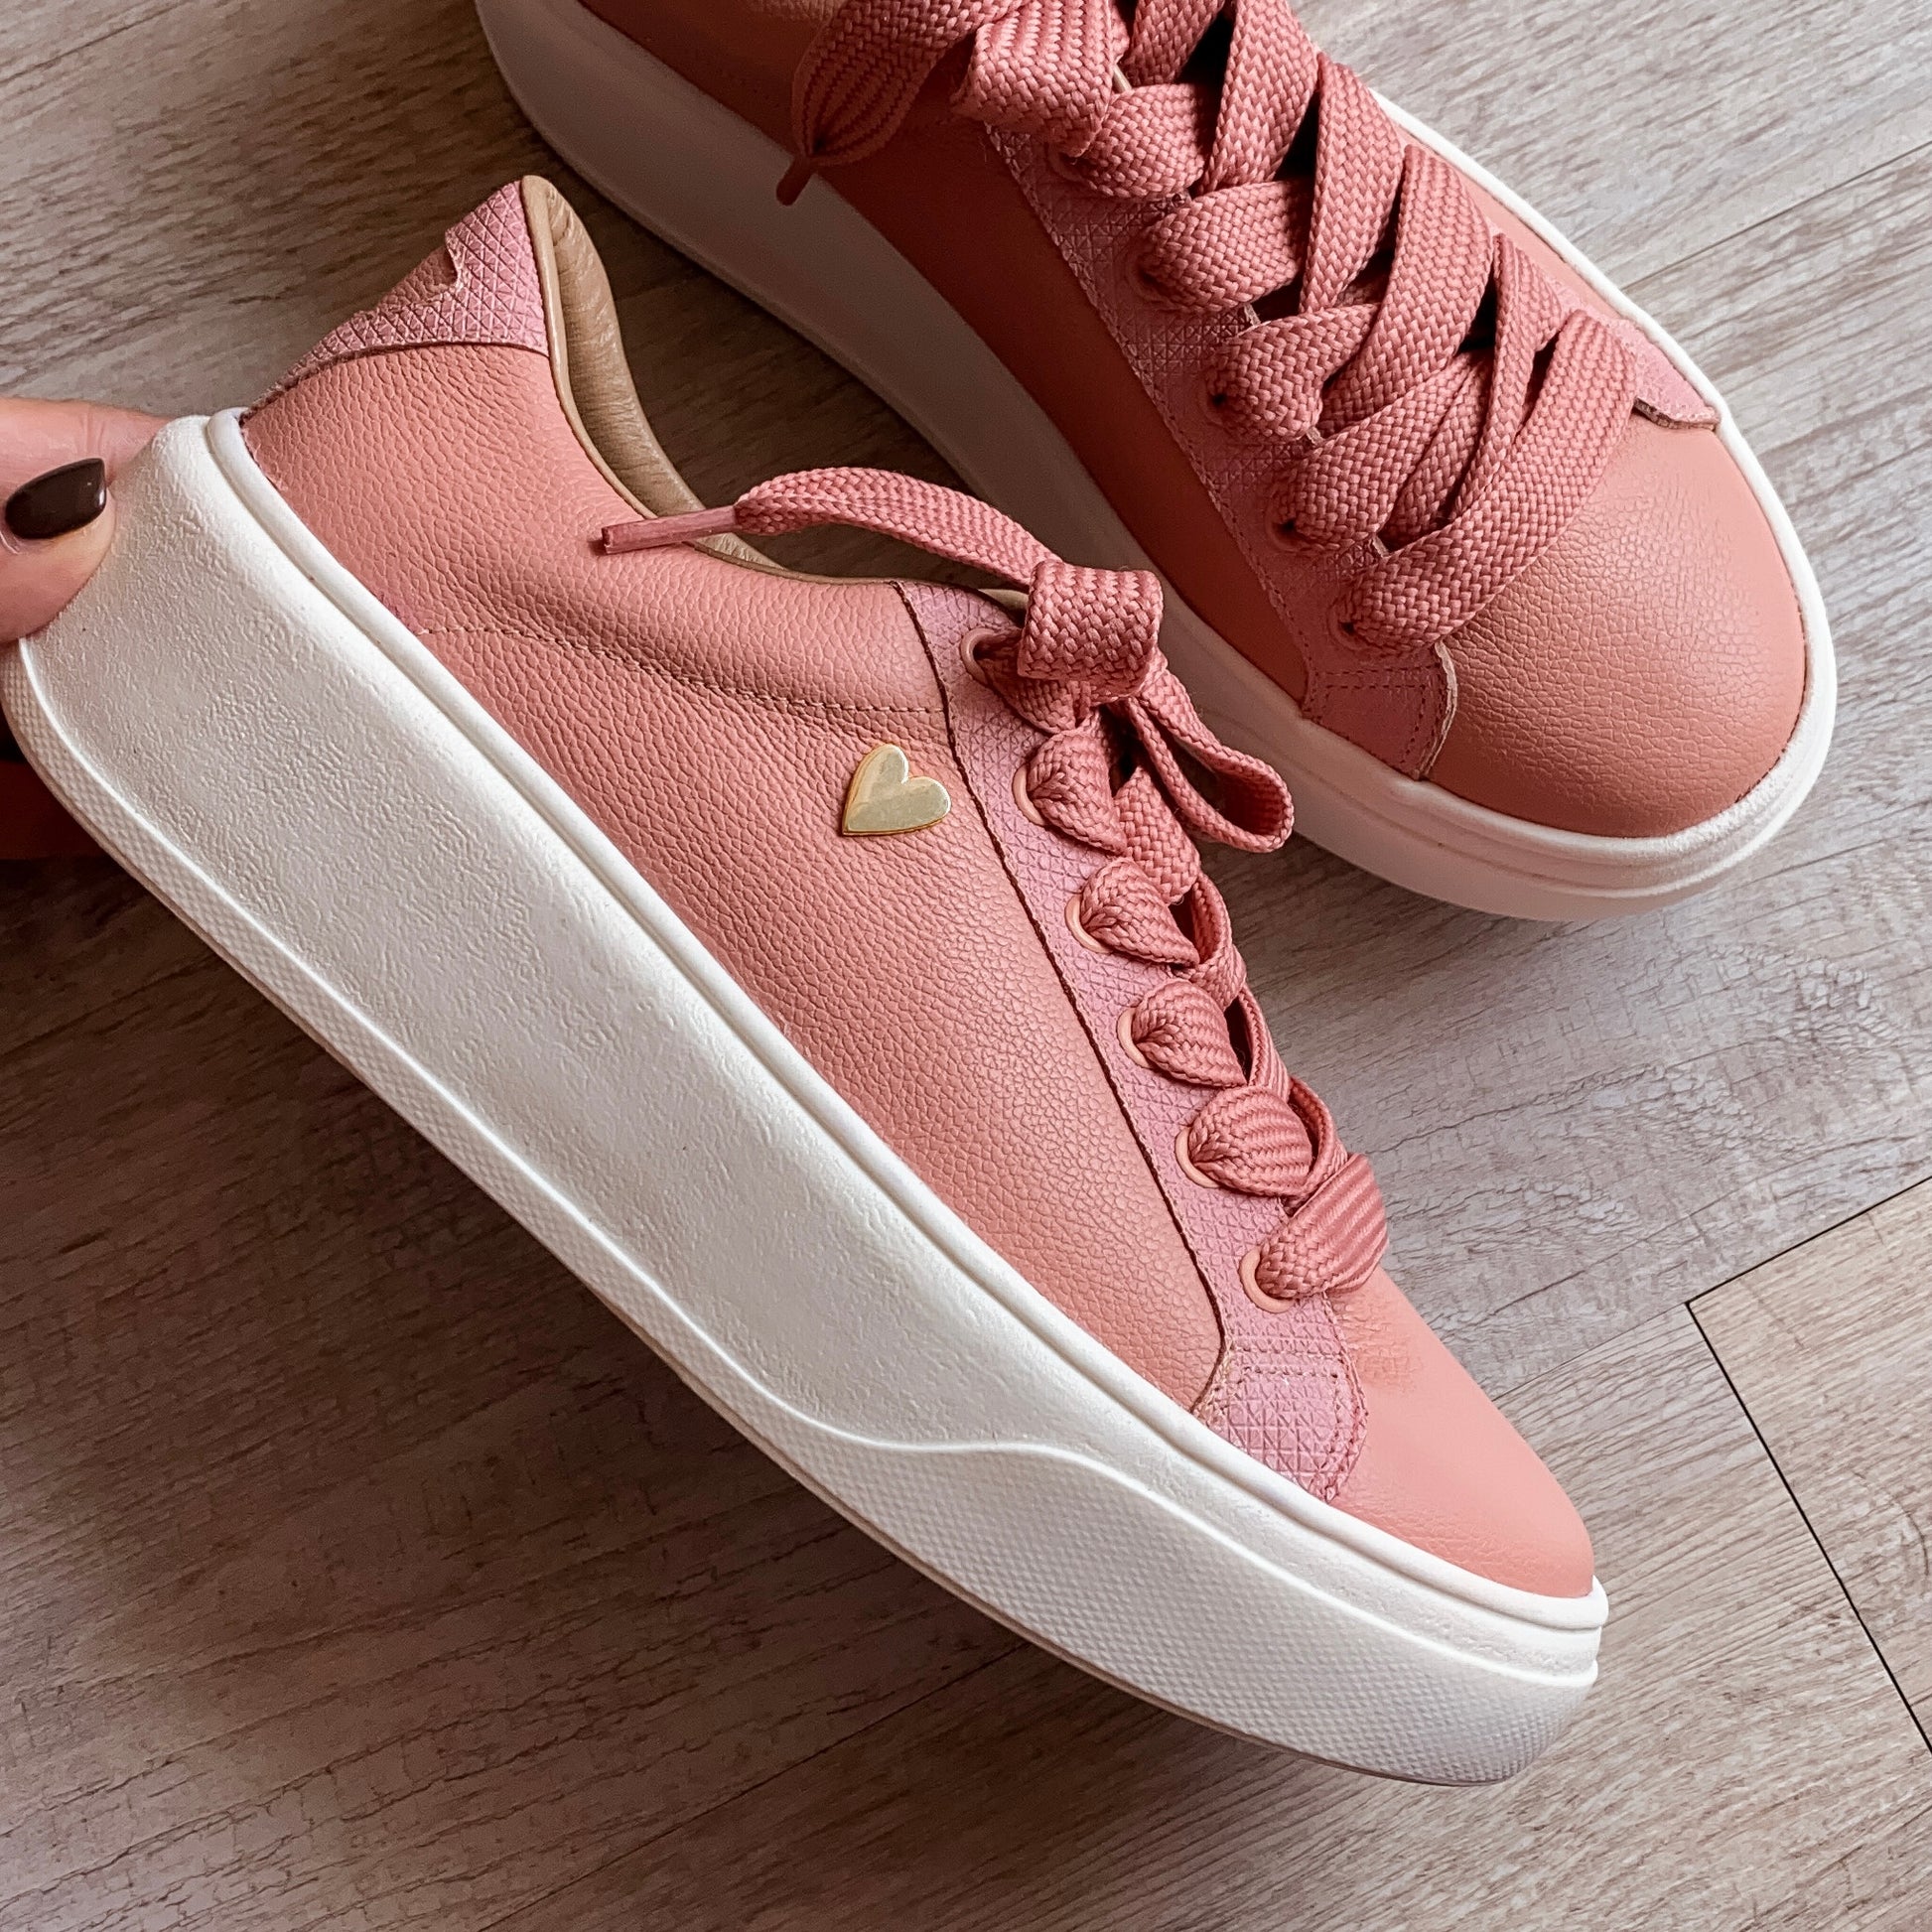 Briana Pink Sneakers by Nataly Mendez Genuine leather upper material Genuine leather insole lining Rubber platform lining American sizes Flexible rubber outsole Hand made 1.5 inch heel height 1 inch platform